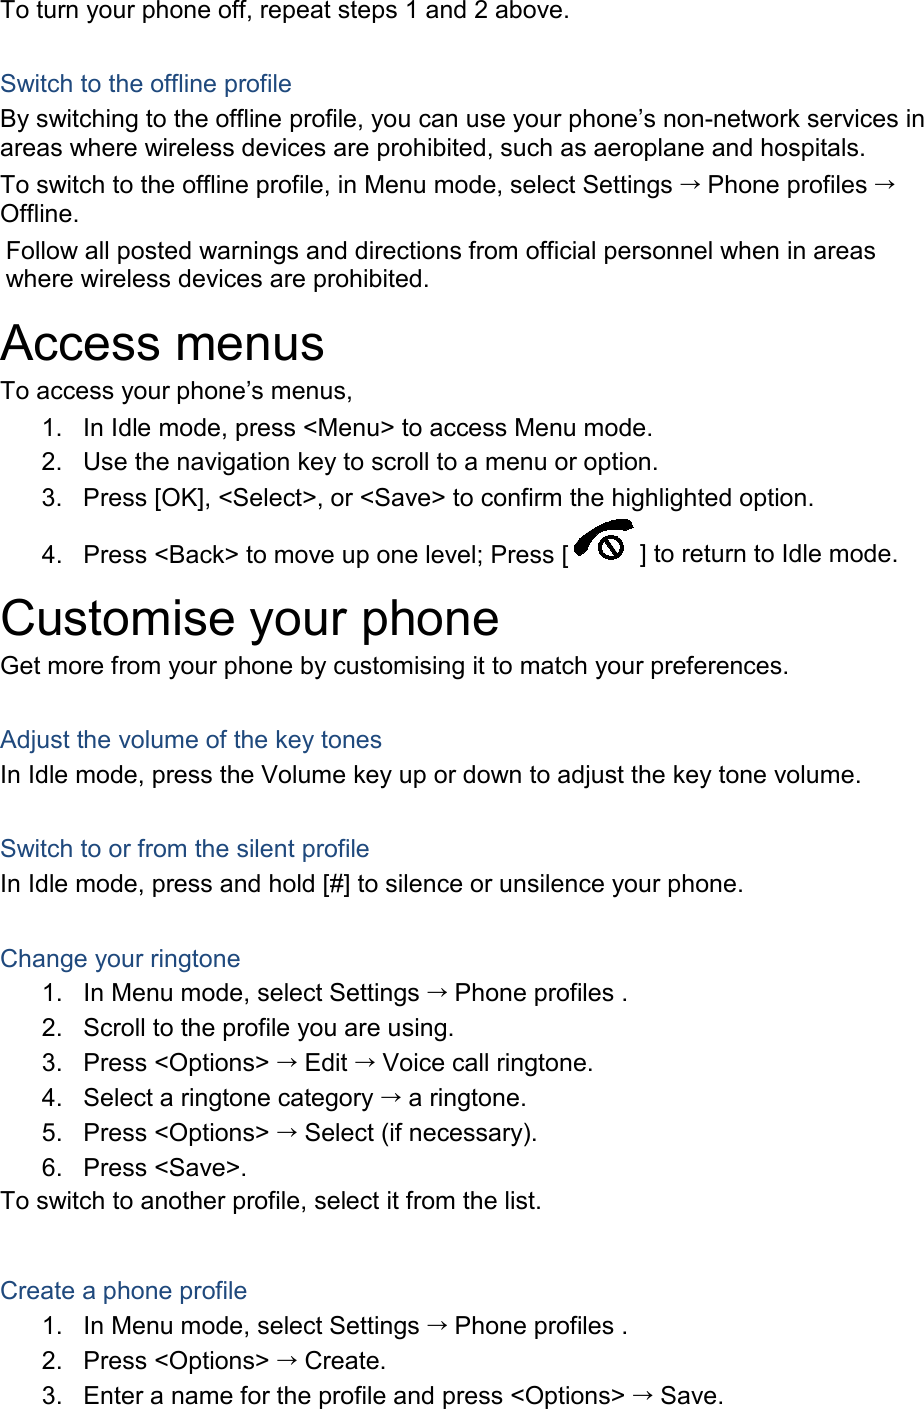 To turn your phone off, repeat steps 1 and 2 above.  Switch to the offline profile By switching to the offline profile, you can use your phone’s non-network services in areas where wireless devices are prohibited, such as aeroplane and hospitals. To switch to the offline profile, in Menu mode, select Settings  Phone profiles  Offline. Follow all posted warnings and directions from official personnel when in areas where wireless devices are prohibited. Access menus To access your phone’s menus, 1. In Idle mode, press &lt;Menu&gt; to access Menu mode. 2. Use the navigation key to scroll to a menu or option. 3. Press [OK], &lt;Select&gt;, or &lt;Save&gt; to confirm the highlighted option. 4. Press &lt;Back&gt; to move up one level; Press [ ] to return to Idle mode. Customise your phone Get more from your phone by customising it to match your preferences.  Adjust the volume of the key tones In Idle mode, press the Volume key up or down to adjust the key tone volume.  Switch to or from the silent profile In Idle mode, press and hold [#] to silence or unsilence your phone.  Change your ringtone 1. In Menu mode, select Settings  Phone profiles . 2. Scroll to the profile you are using. 3. Press &lt;Options&gt;  Edit  Voice call ringtone. 4. Select a ringtone category  a ringtone. 5. Press &lt;Options&gt;  Select (if necessary). 6. Press &lt;Save&gt;. To switch to another profile, select it from the list.  Create a phone profile 1. In Menu mode, select Settings  Phone profiles . 2. Press &lt;Options&gt;  Create. 3. Enter a name for the profile and press &lt;Options&gt;  Save. 